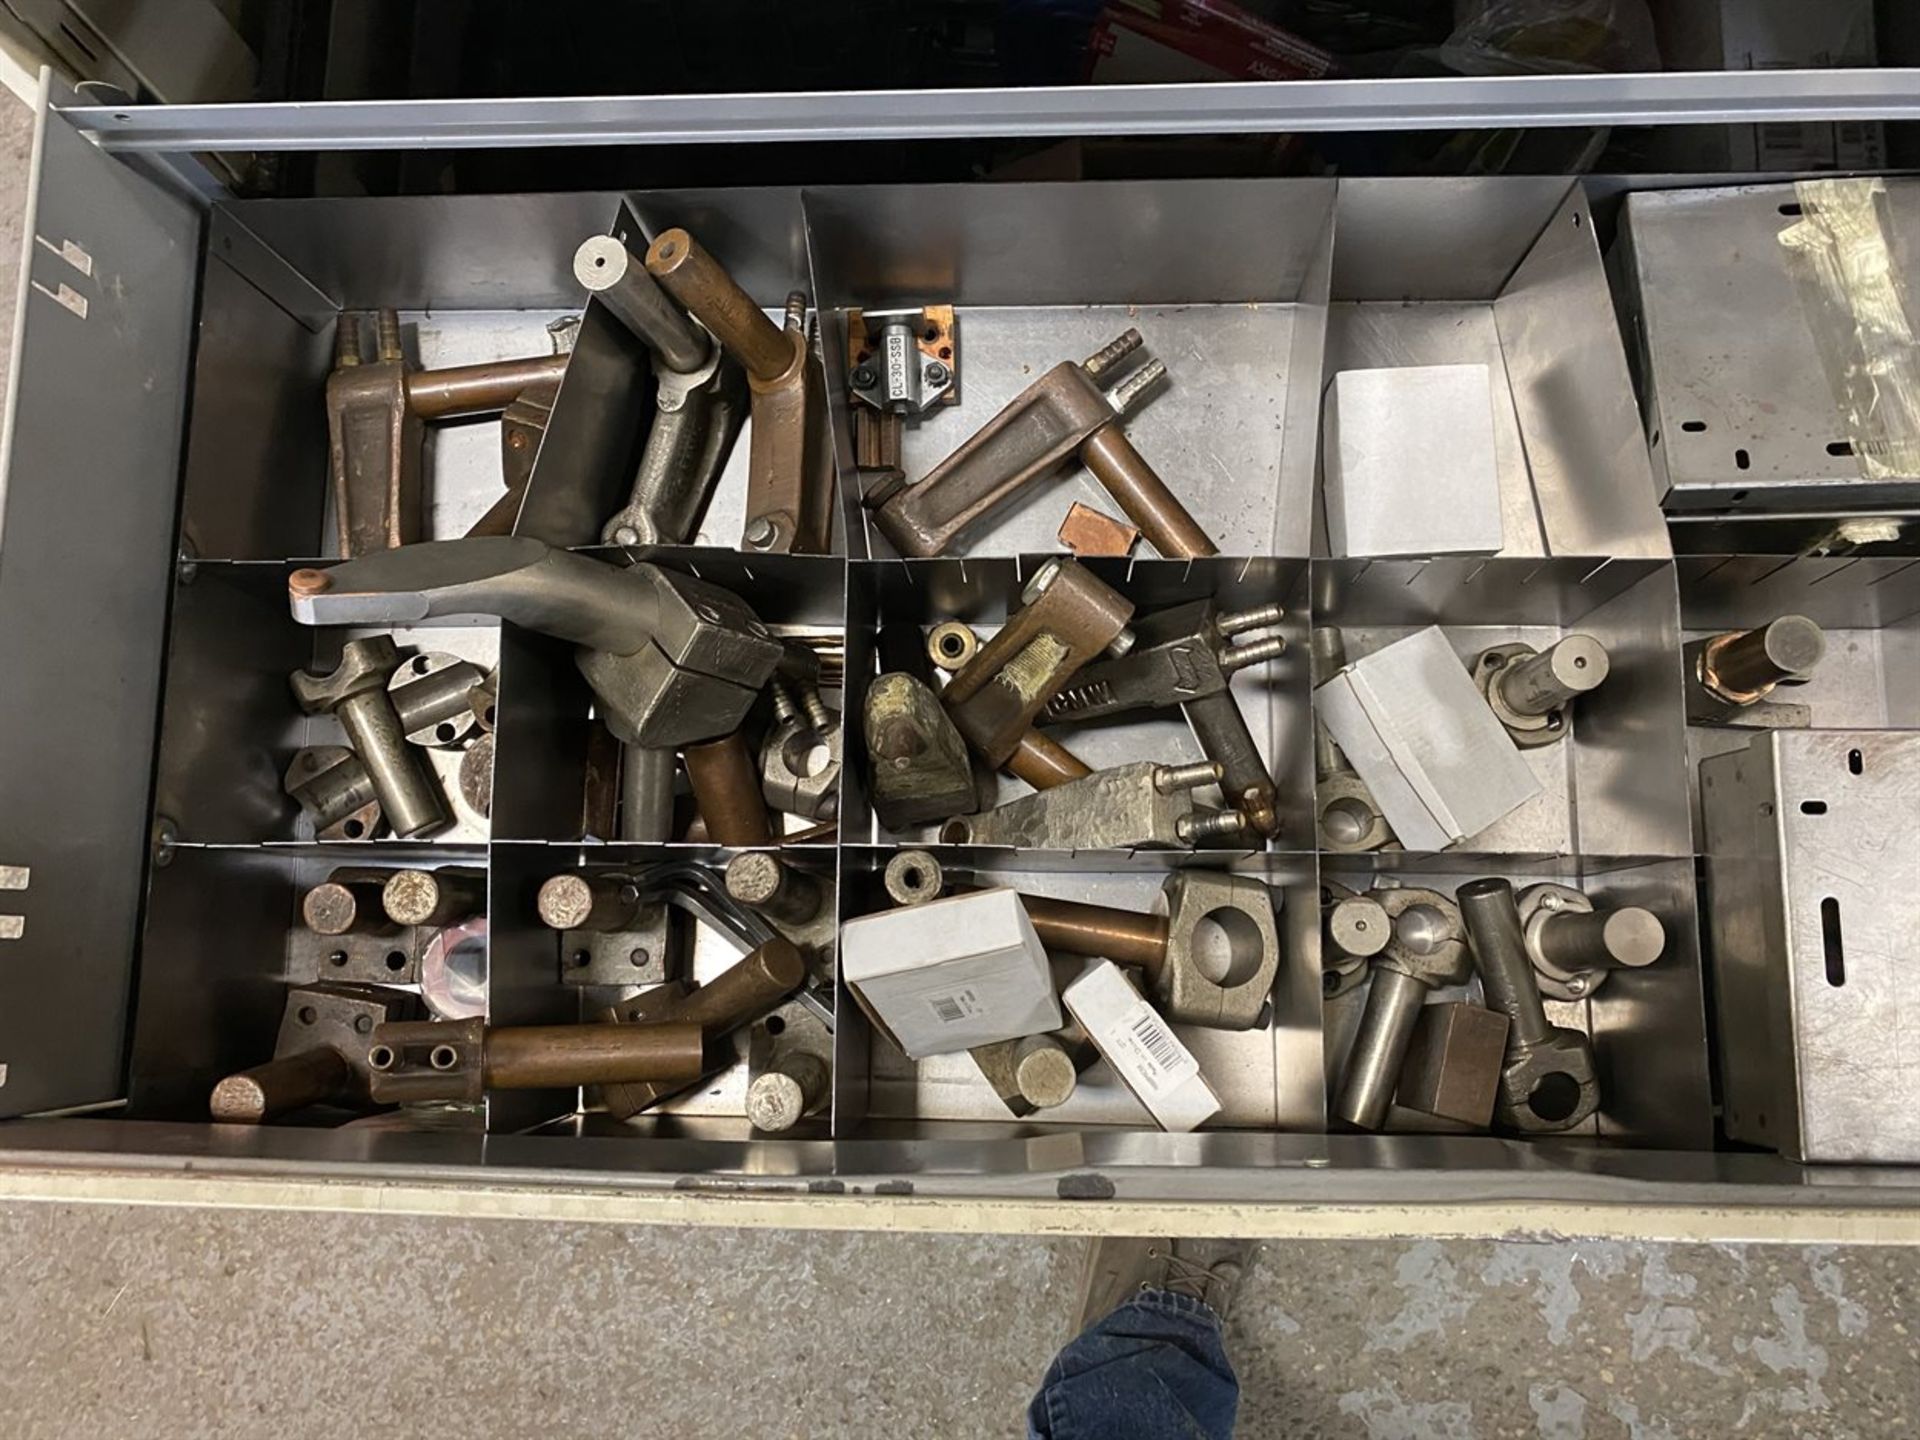 Lot of Spot Welder Tooling Including Tips, Tip Holders, Arms - Image 5 of 5